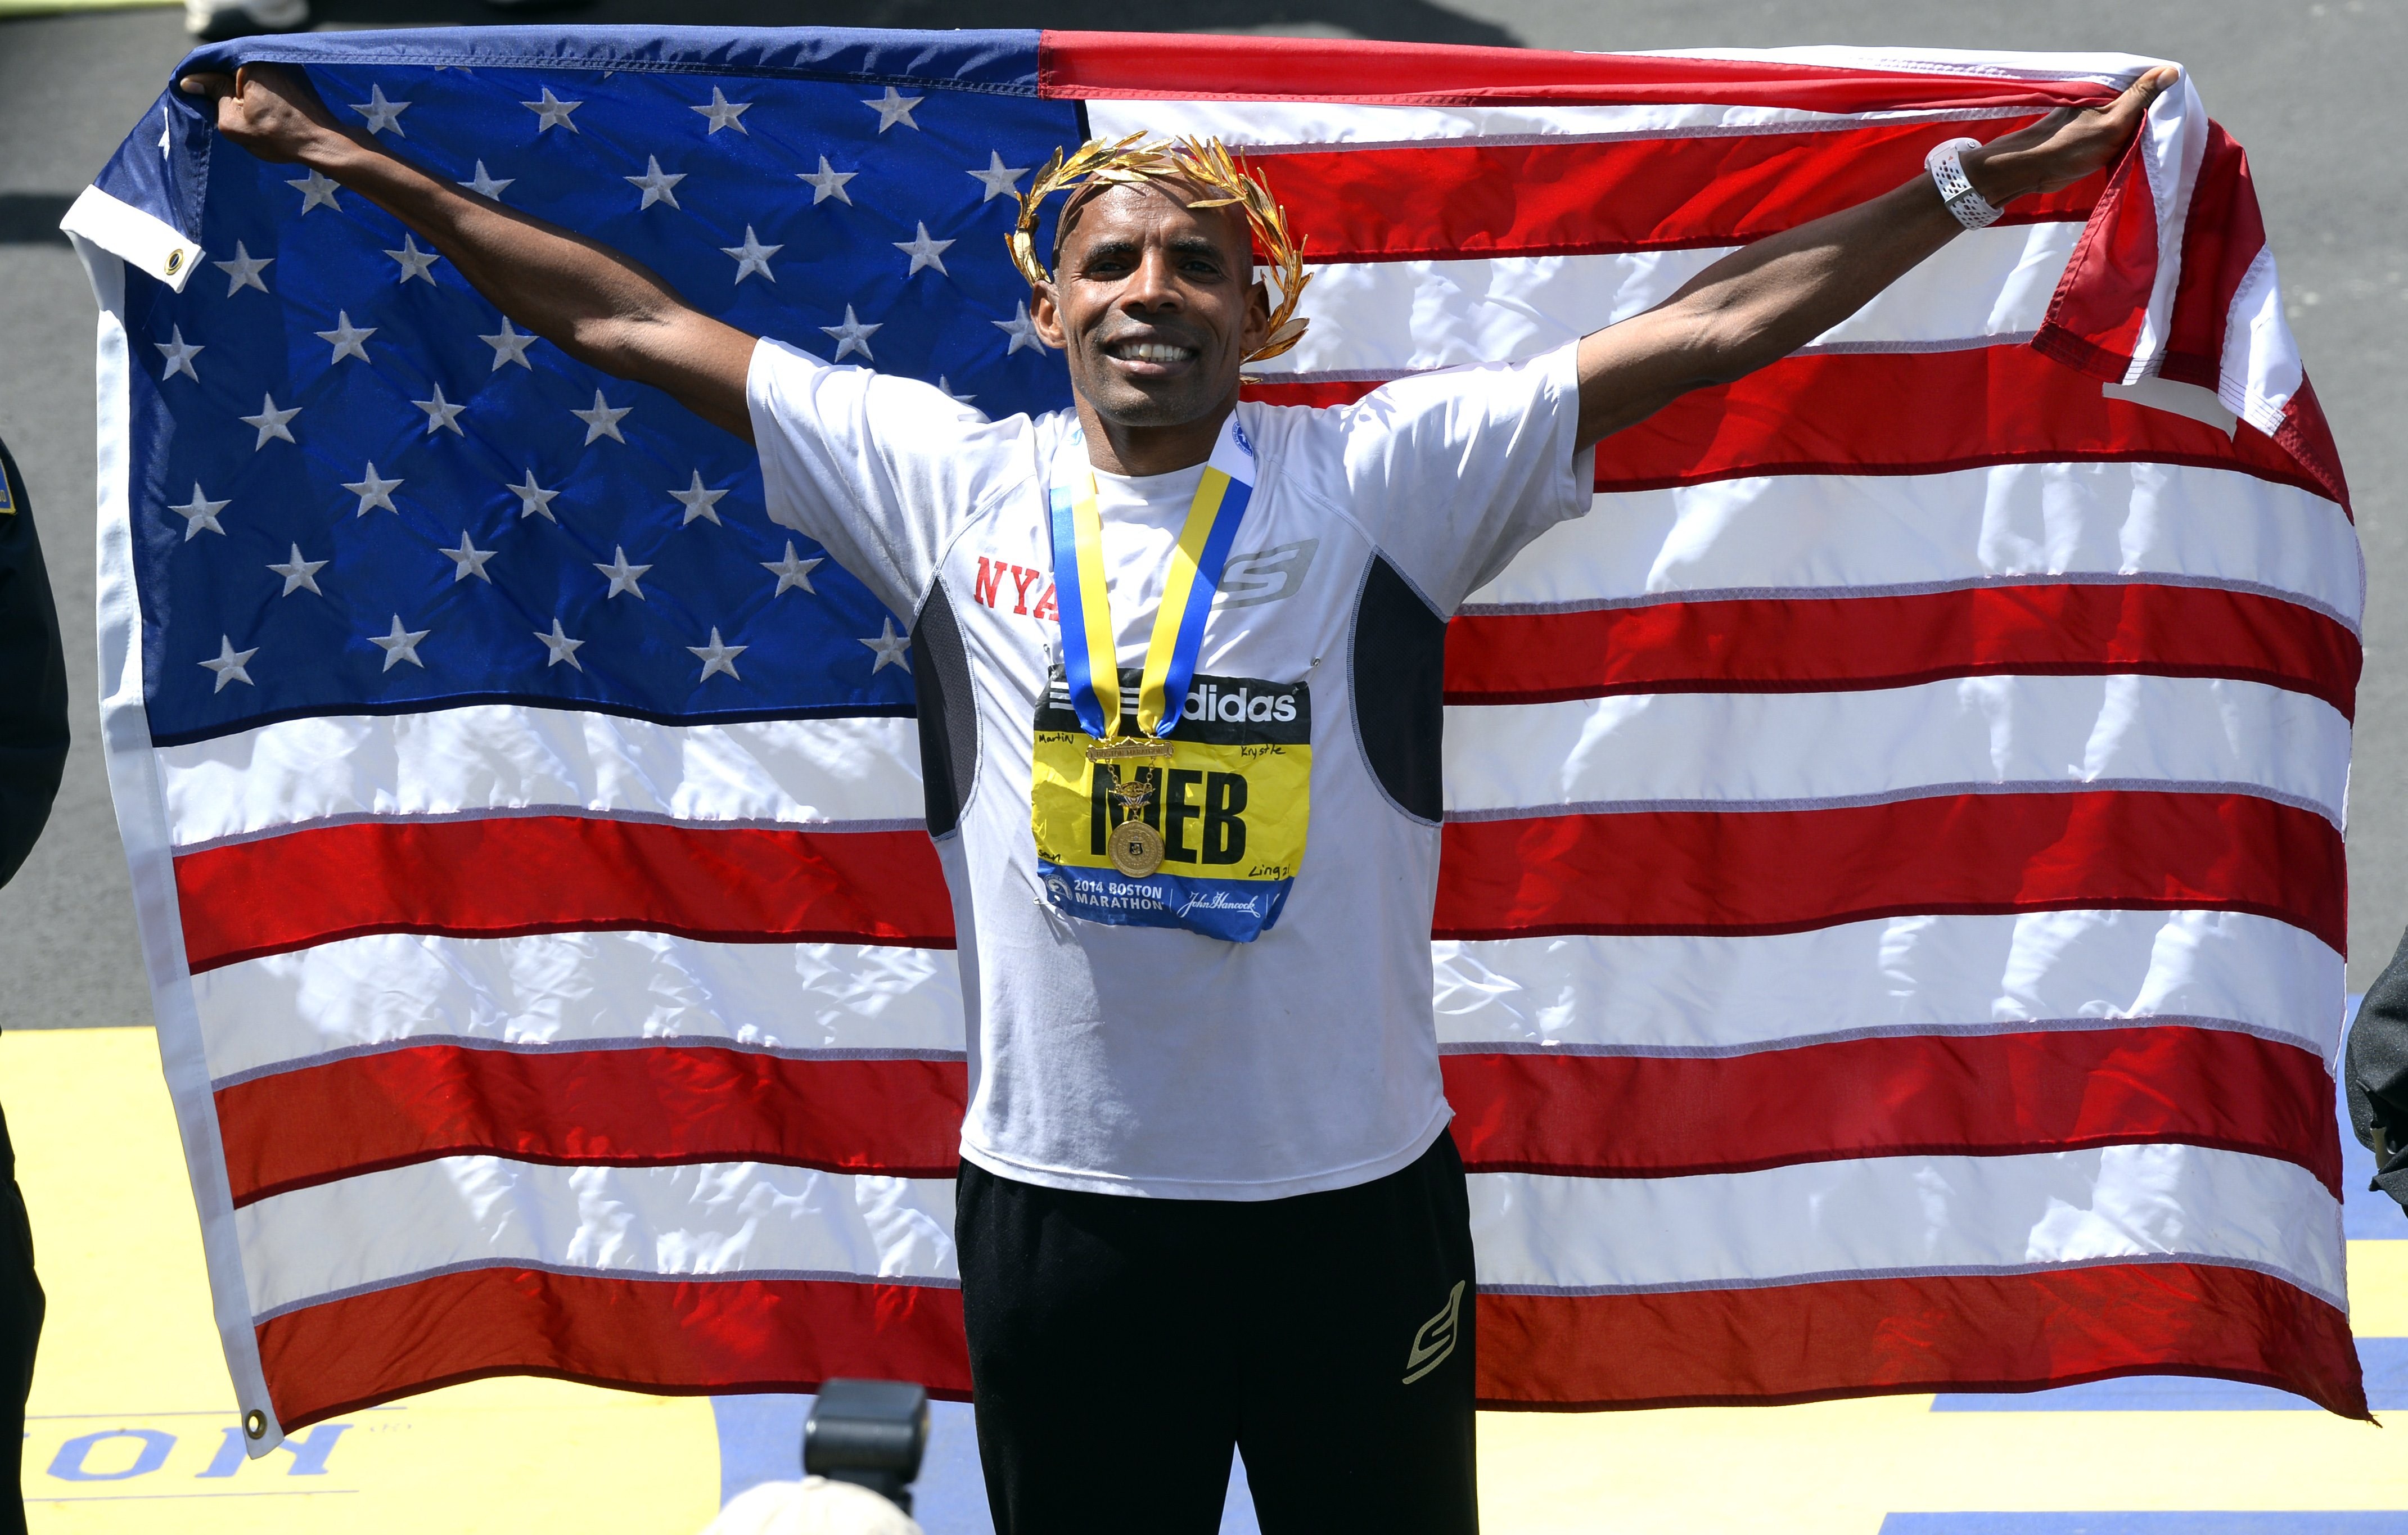 Meb Keflezighi of the US, celebrates after winning the Men's Elite division of the 118th Boston Marathon in Boston, Massachusetts April 21, 2014 . (TIMOTHY A. CLARY—AFP/Getty Images)